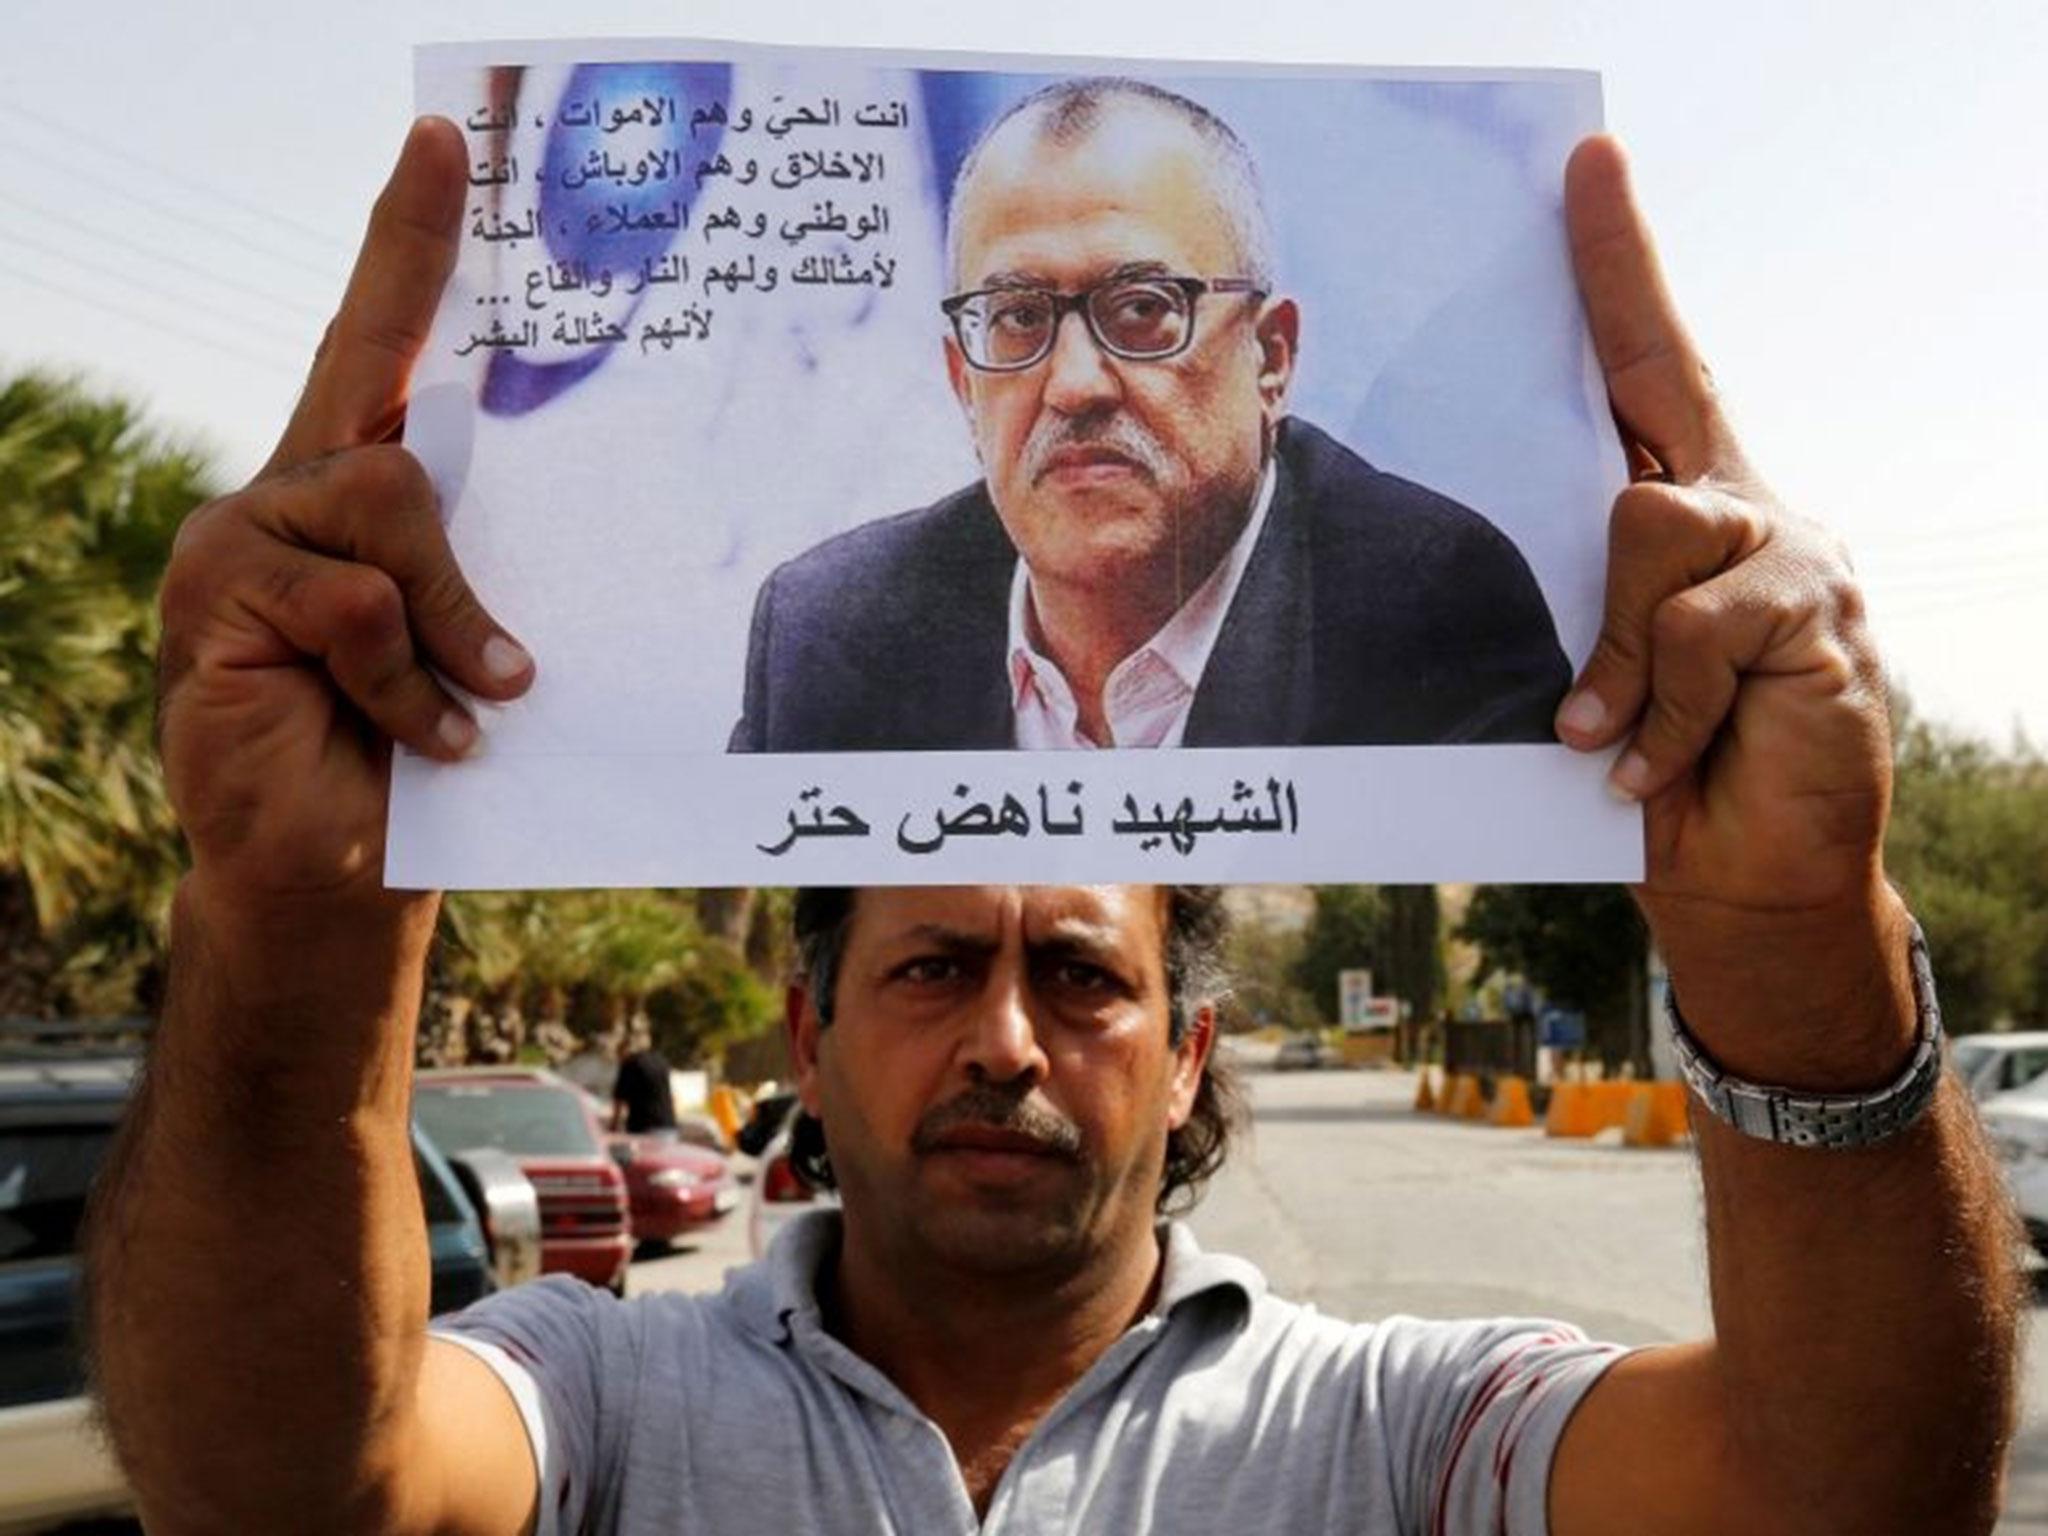 A relative of Jordanian writer Nahed Hattar holds his picture during a sit-in in the town of Al-Fuheis near Amman, Jordan, 25 September, 2016